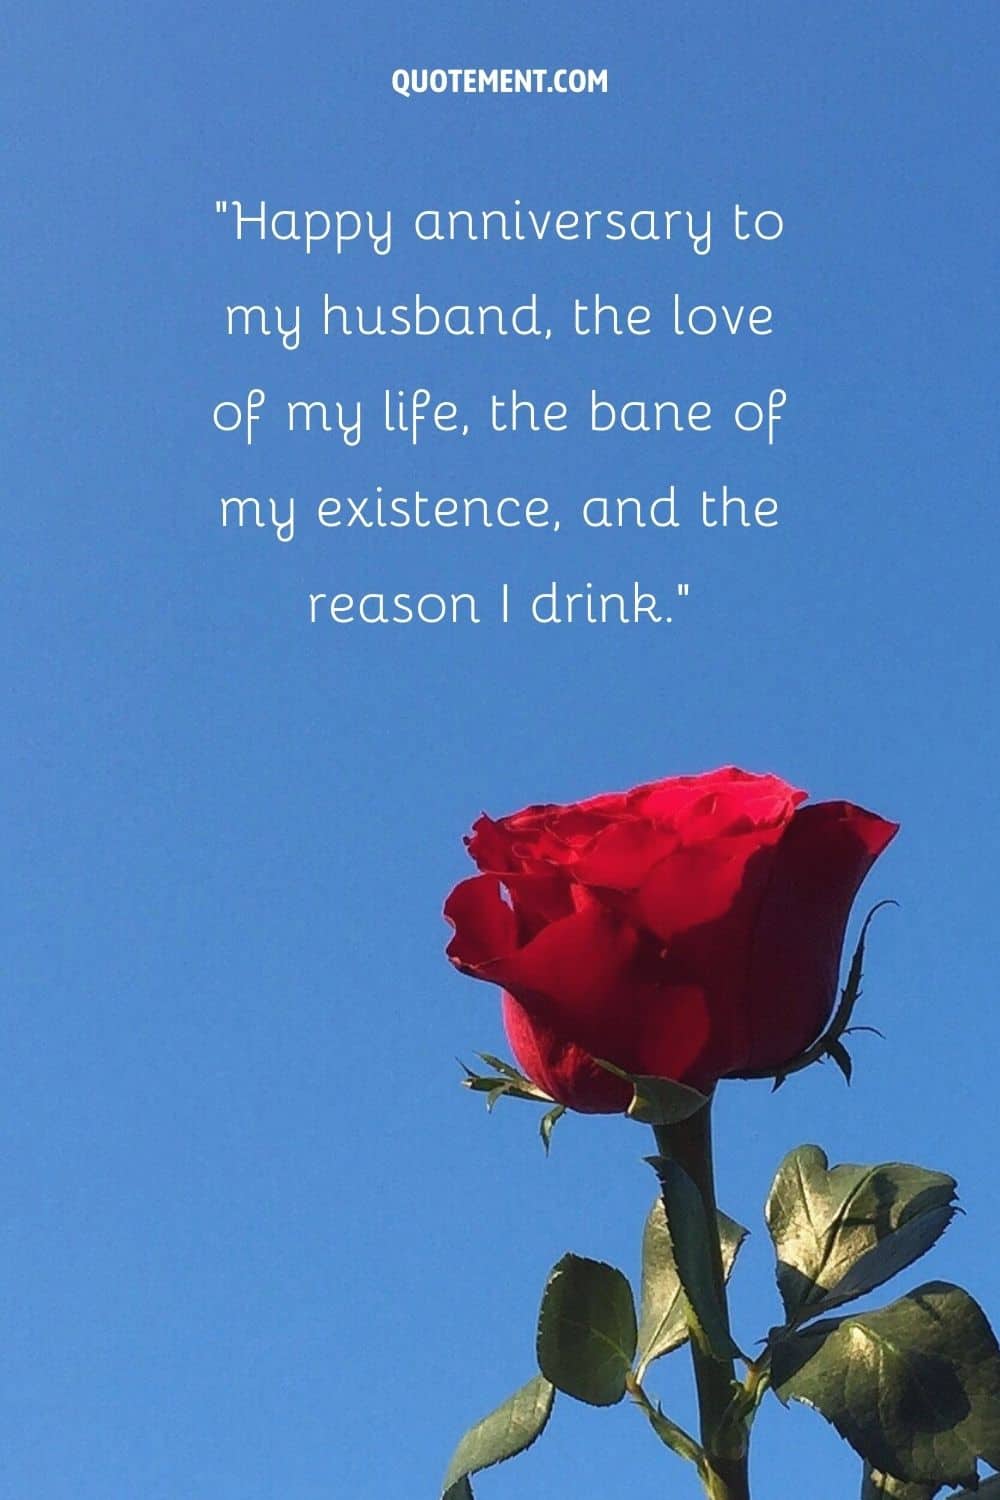 Happy anniversary to my husband, the love of my life, the bane of my existence, and the reason I drink.